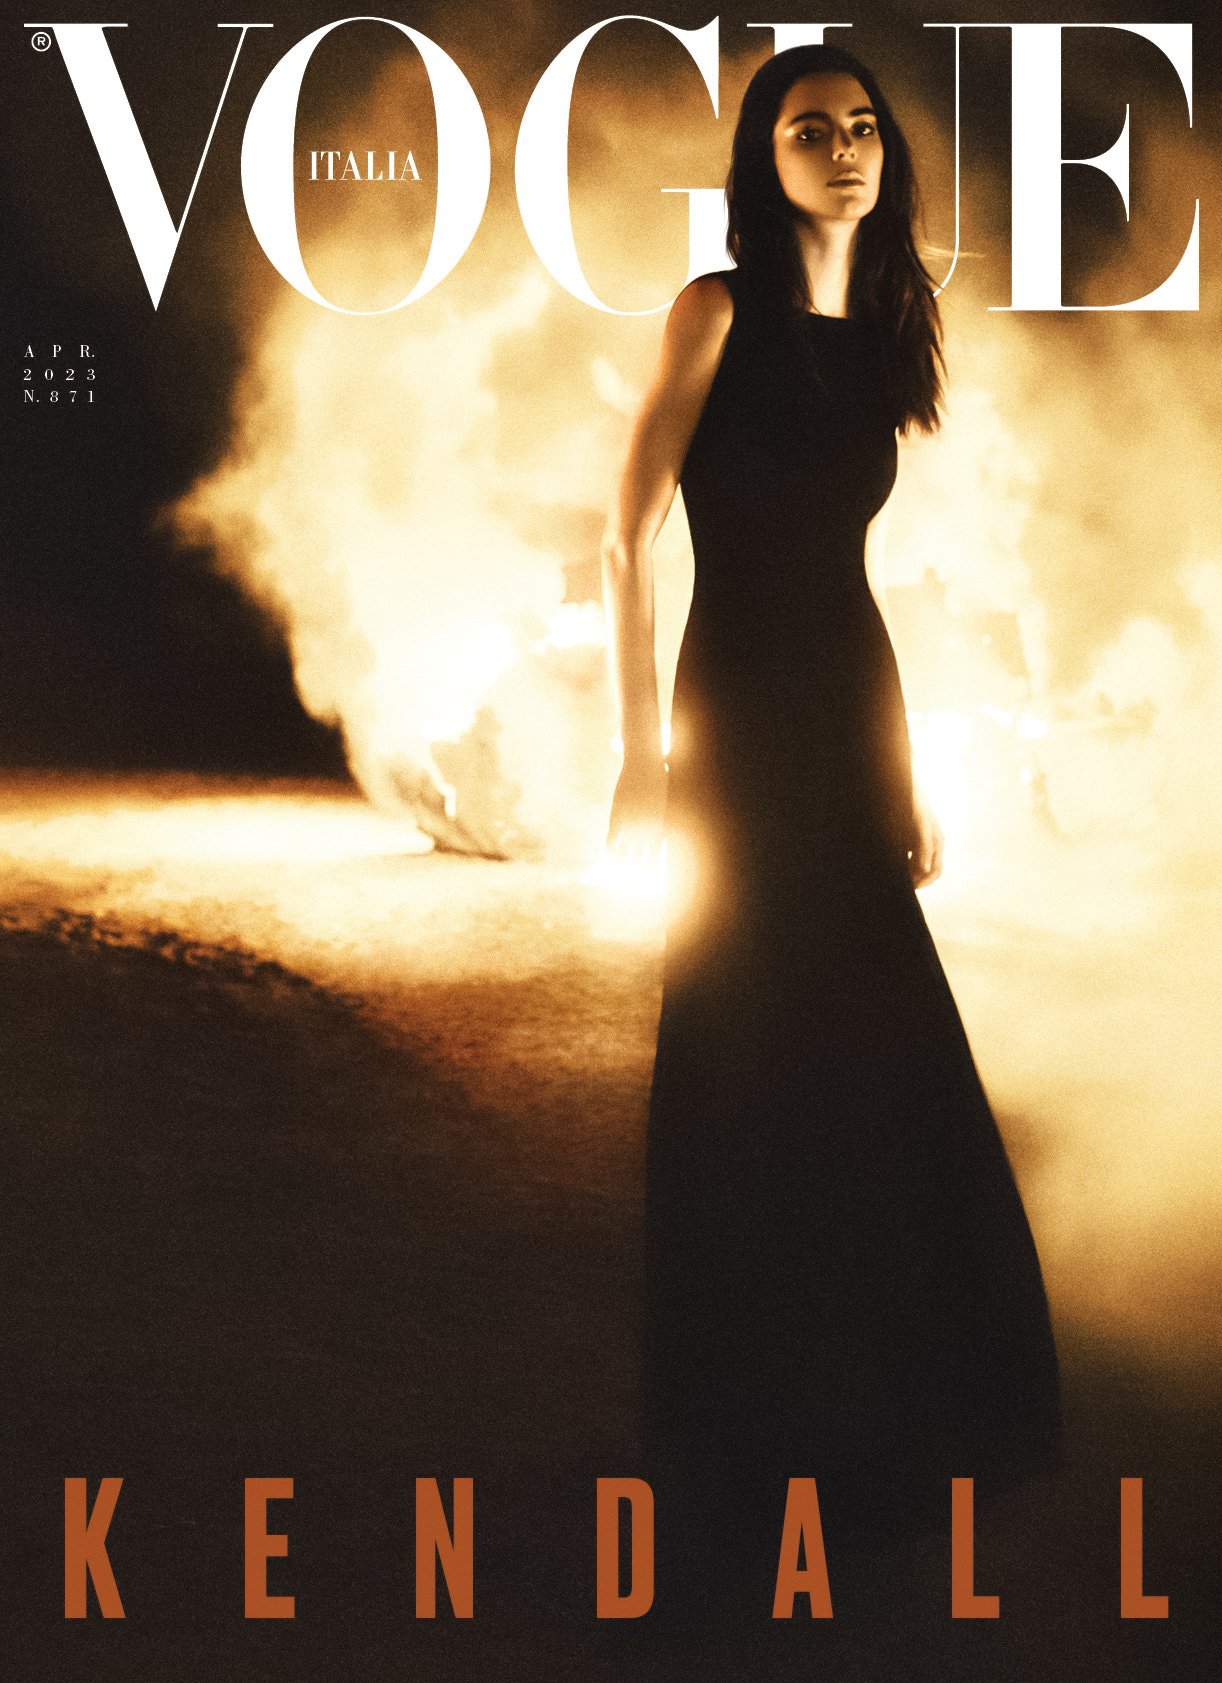 Kendall-Jenner-by-Robin-Galiegue-for-Vogue-Italia-April-2023-00010.jpeg